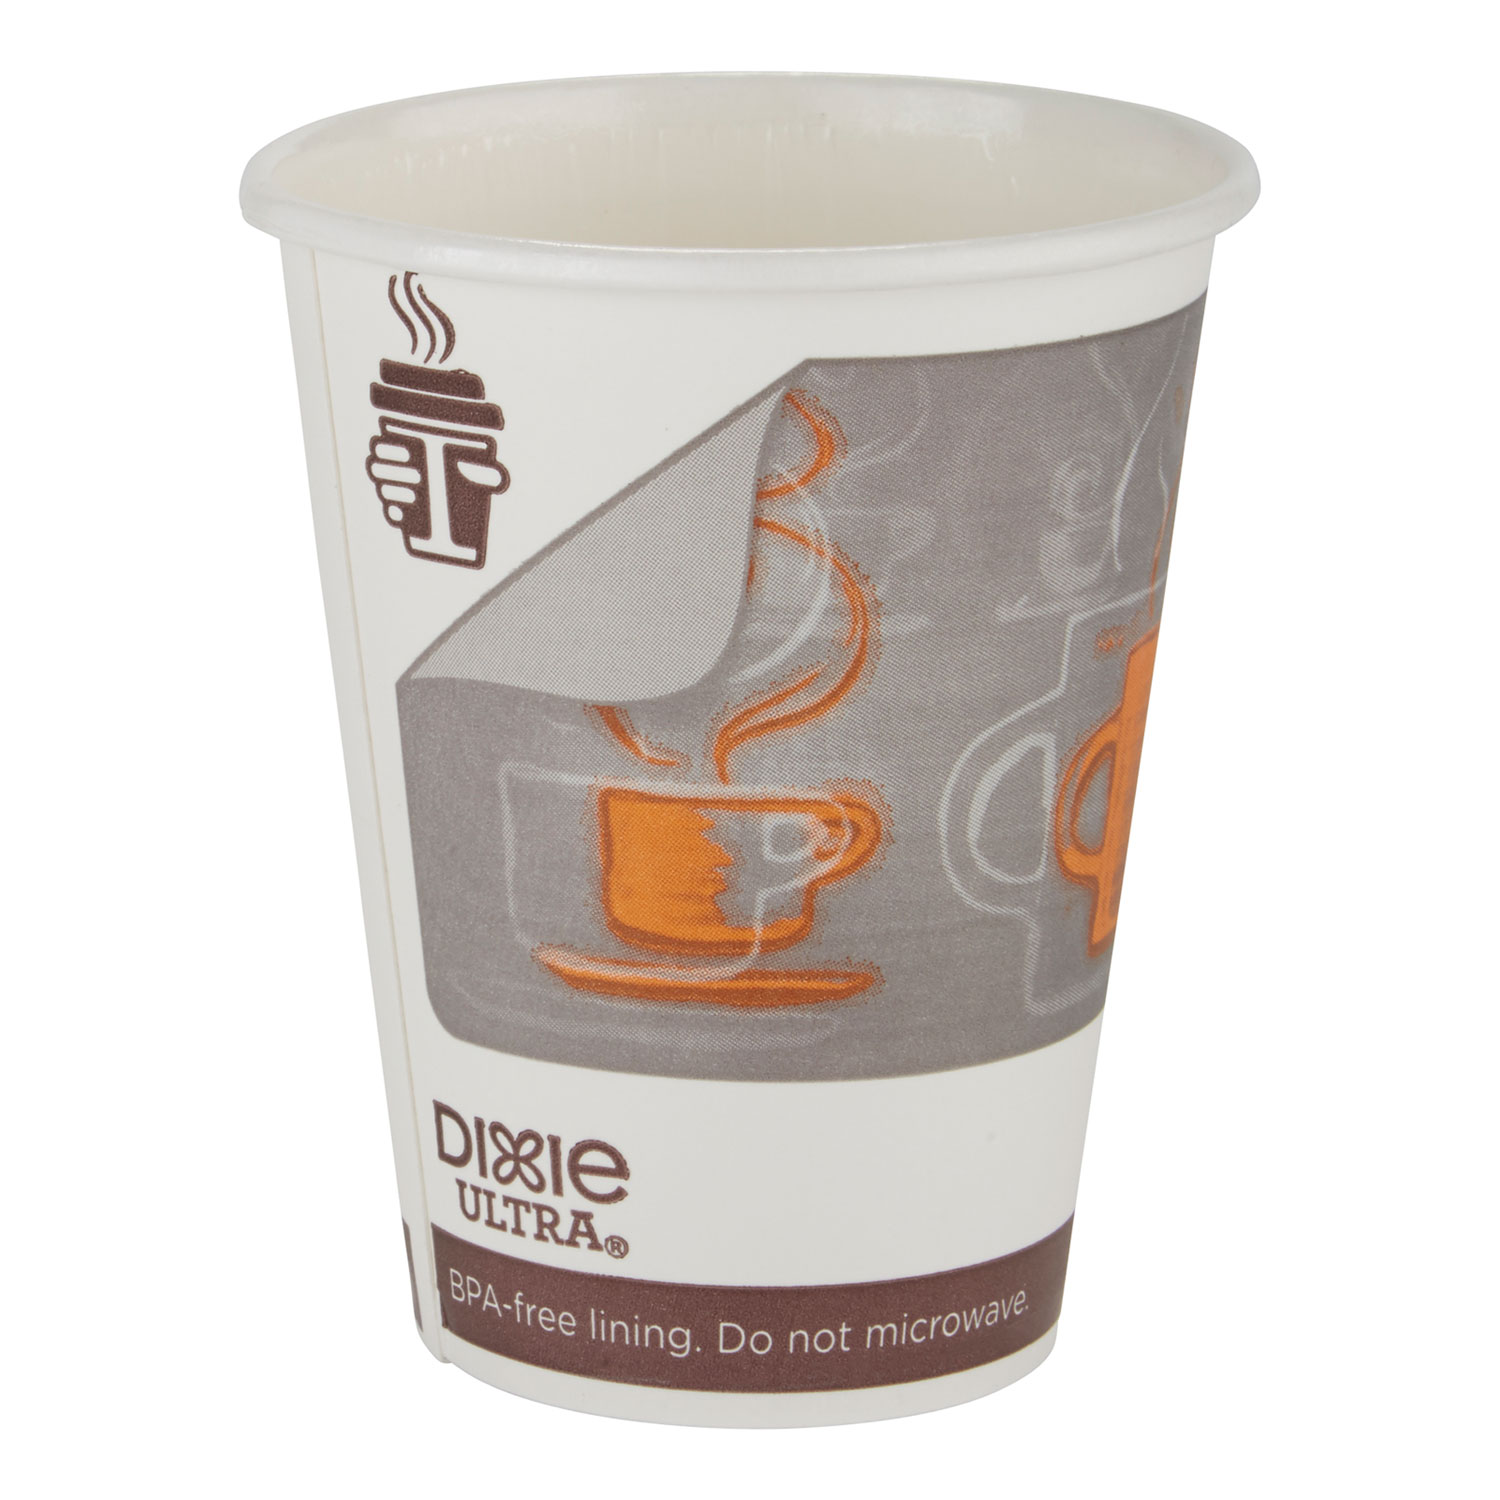  Georgia Pacific Professional 6350AR Dixie Ultra Insulair Paper Hot Cup, 20 oz, Coffee, 40 Cups/Sleeve, 15 Sleeves/CT (DXE6350AR) 